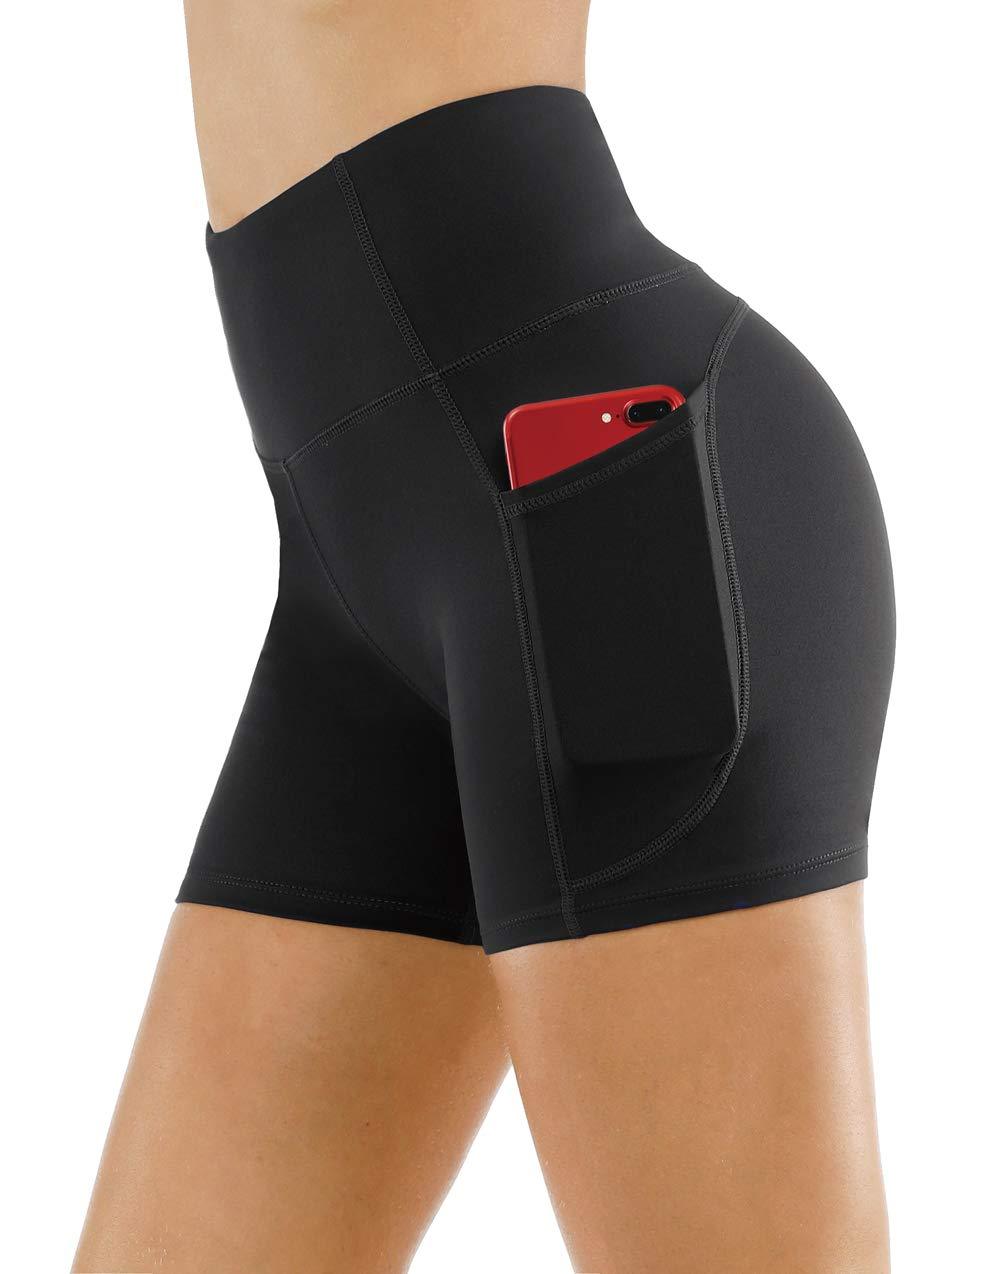 THE GYM PEOPLE High Waist Yoga Shorts for Women Tummy Control Fitness Athletic Workout Running Shorts with Deep Pockets (X-Large, Black) - Bona Fide Fashion